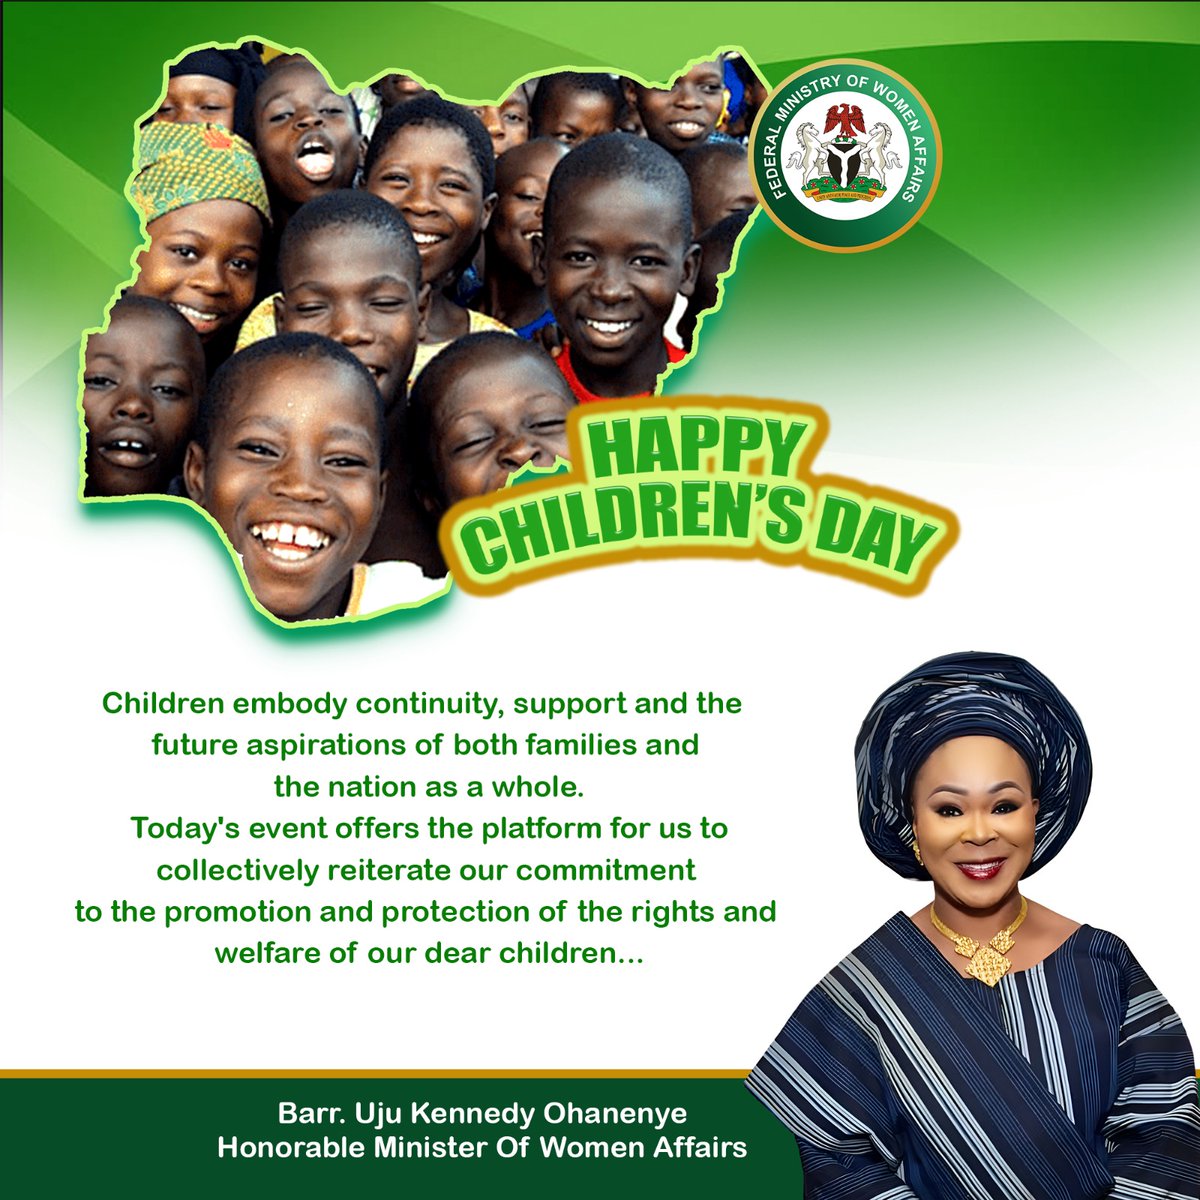 The Entire Staff and Management of the Federal Ministry of Women Affairs is Wishing Nigerian Children blissful Happy Children's Day.